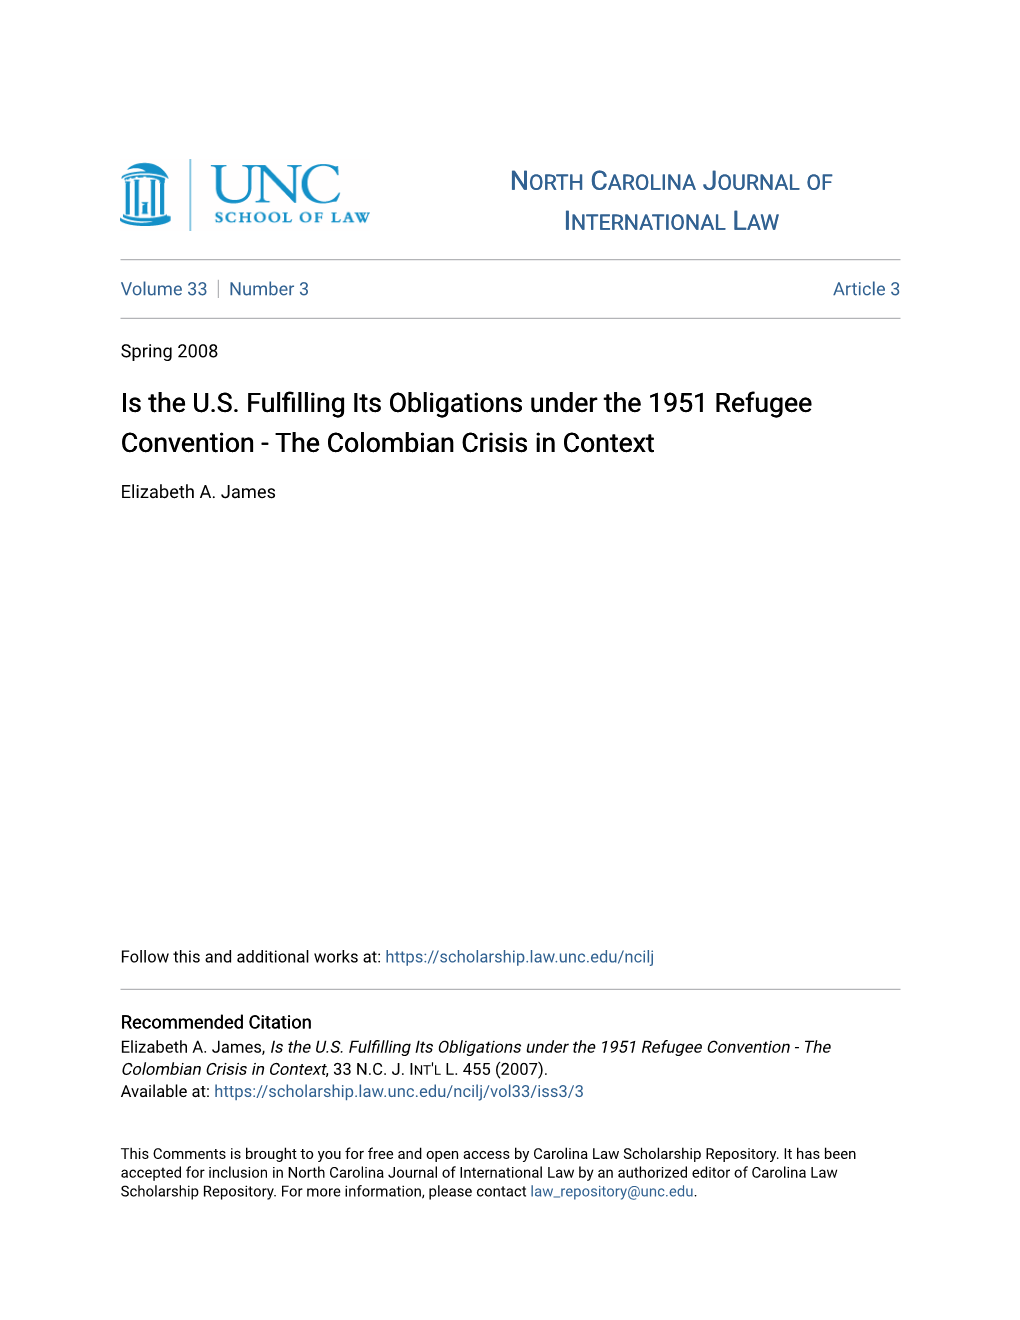 Is the U.S. Fulfilling Its Obligations Under the 1951 Refugee Convention - the Colombian Crisis in Context